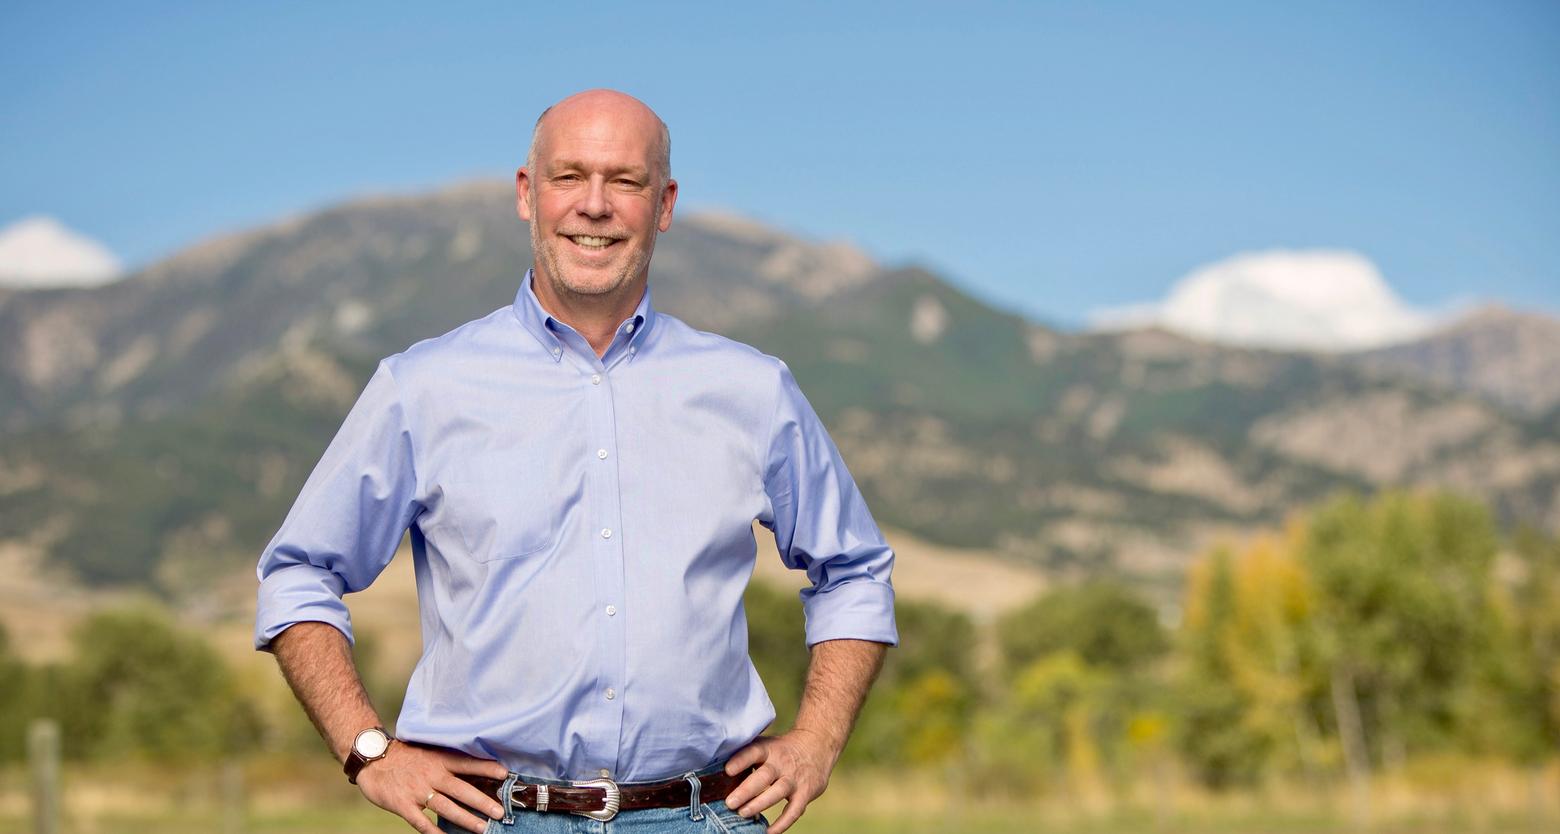 Montana Gov. Greg Gianforte, who touts himself as a hunter, signed into law actions against wolves and grizzlies in the state that are among the most retrogressive wildlife management measures, violating fair chase ethics, in nearly a century. Gianforte stubbornly refuses to put back in place hunting quotas that limit the number of Yellowstone wolves allowed to be killed when they cross the invisible park border into the state. Gianforte himself trapped and killed a Yellowstone research wolf in Montana earlier this winter. In September, hunters killed two wolf pups and 1.5-year-old wolf that was member of beloved Yellowstone pack. Critics say Gianforte and his anti-wolf and anti-grizzly appointees to the Montana Fish and Wildlife Commission have brought a stain to the once proud, scientifically-informed tradition of the Montana Fish Wildlife and Parks Department. Photo courtesy Montana governor's office.